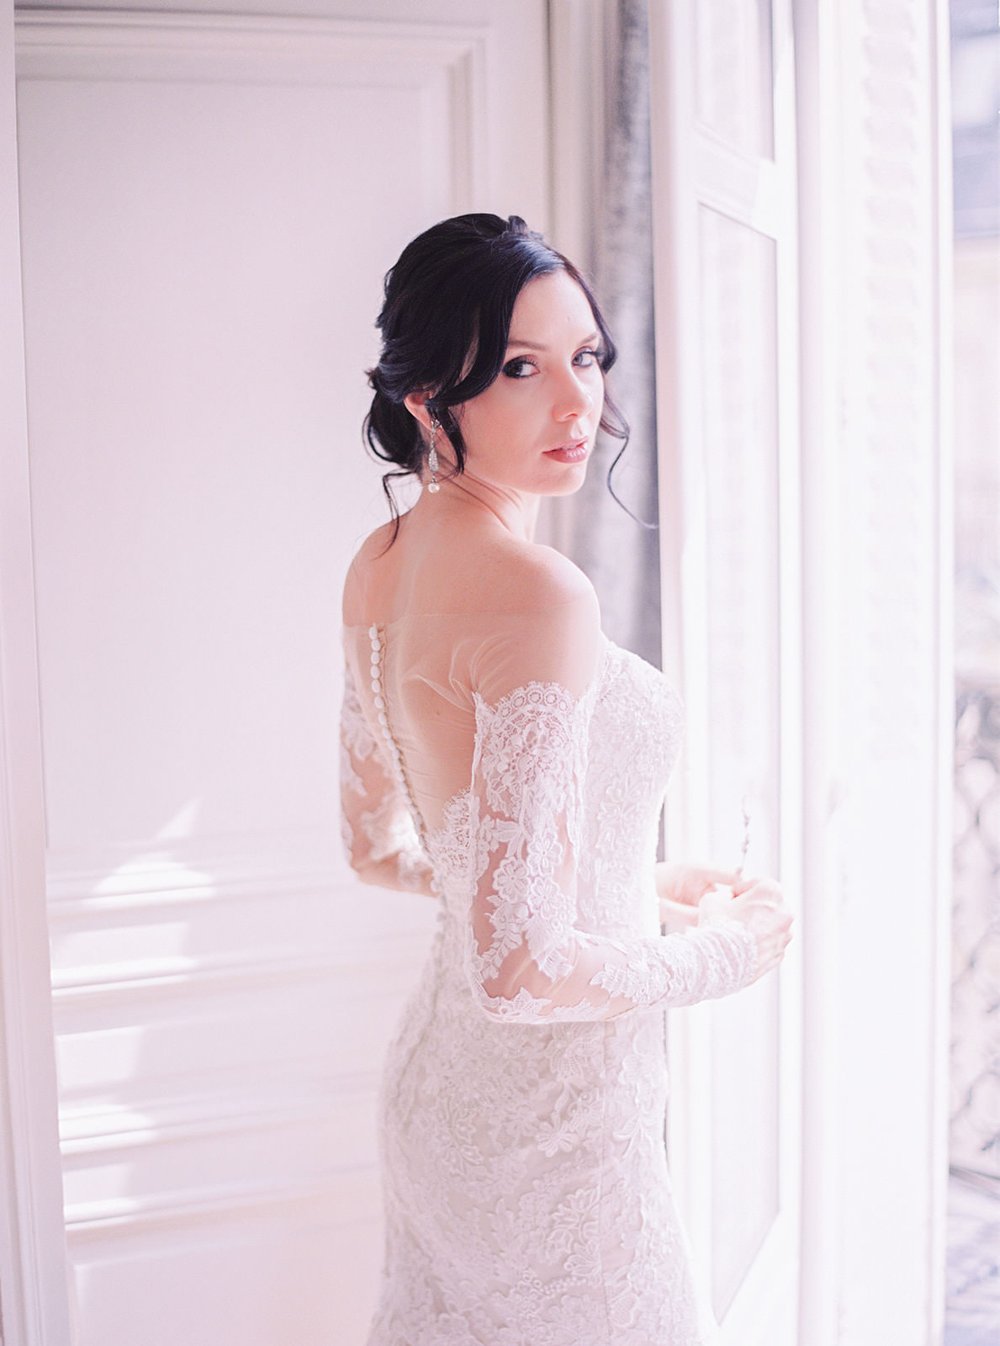  Bridal updo and makeup for bridal boudoir makeup and hairstyling in Paris, France, by Onorina Jomir Beauty. 